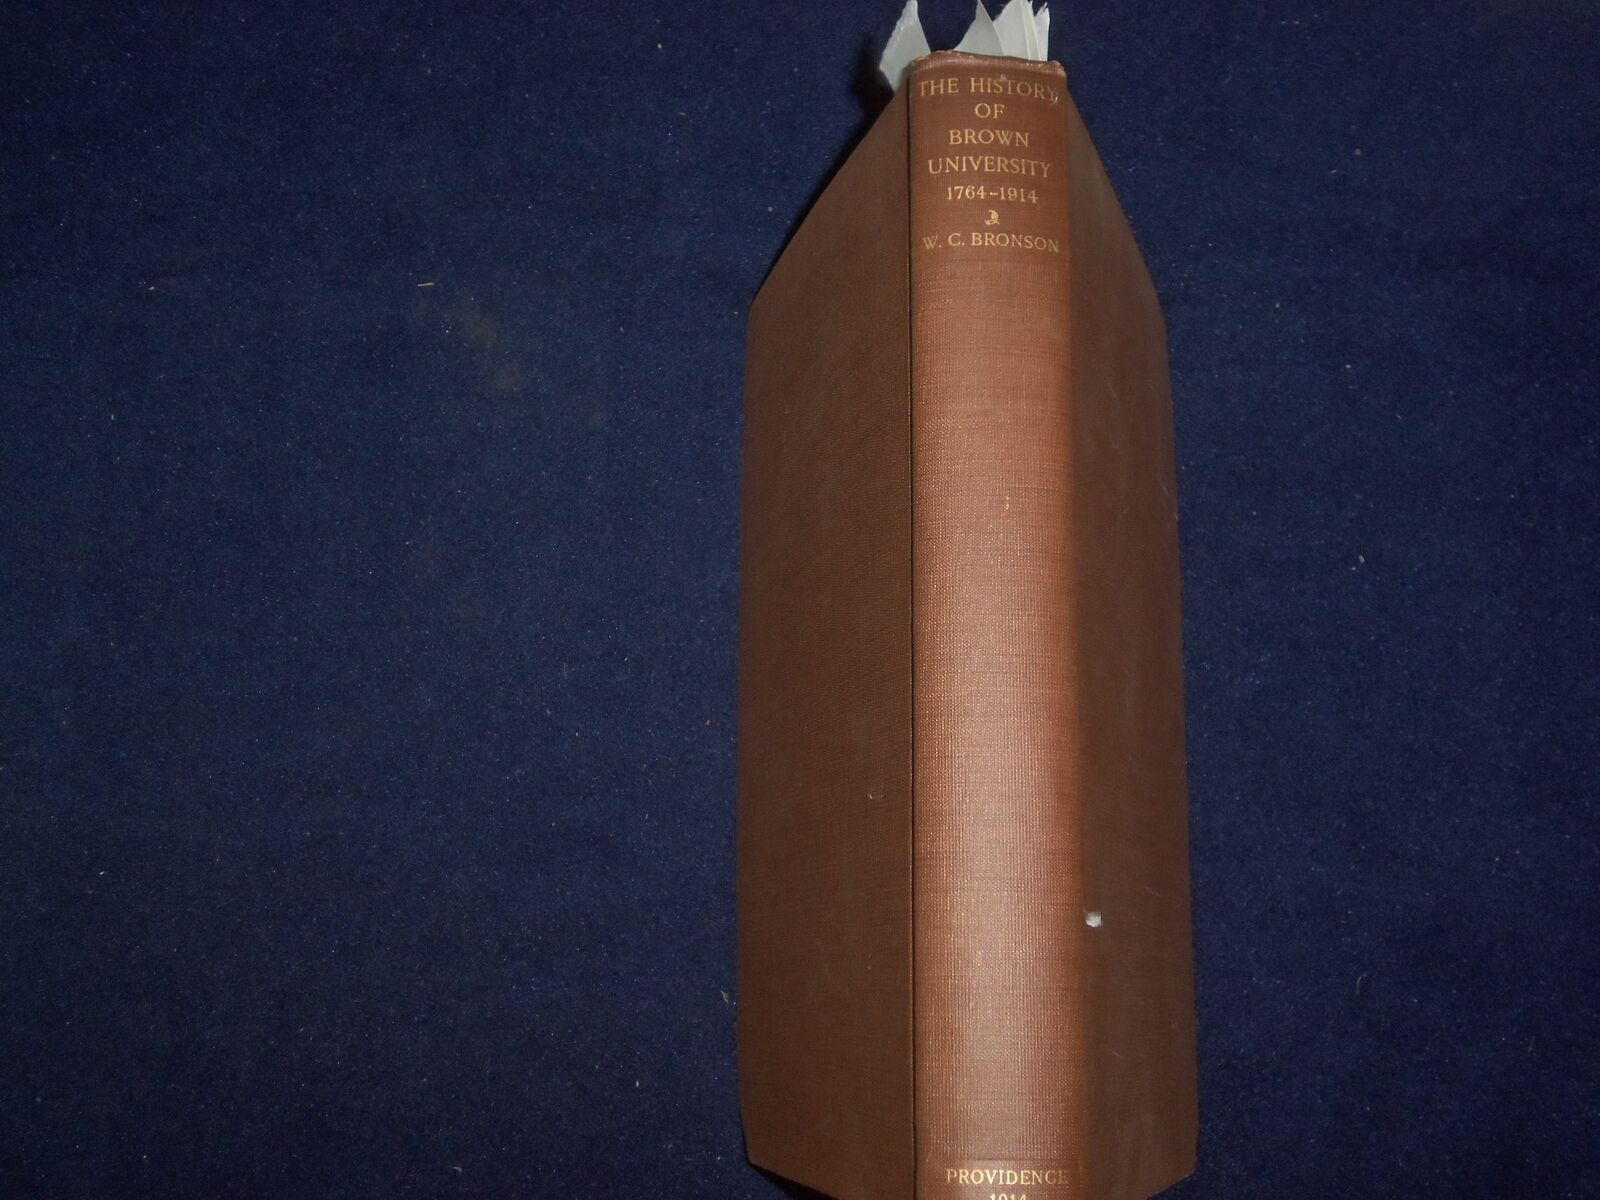 1914 THE HISTORY OF BROWN UNIVERSITY HARDCOVER BOOK BY WALTER BRONSON - KD 9081